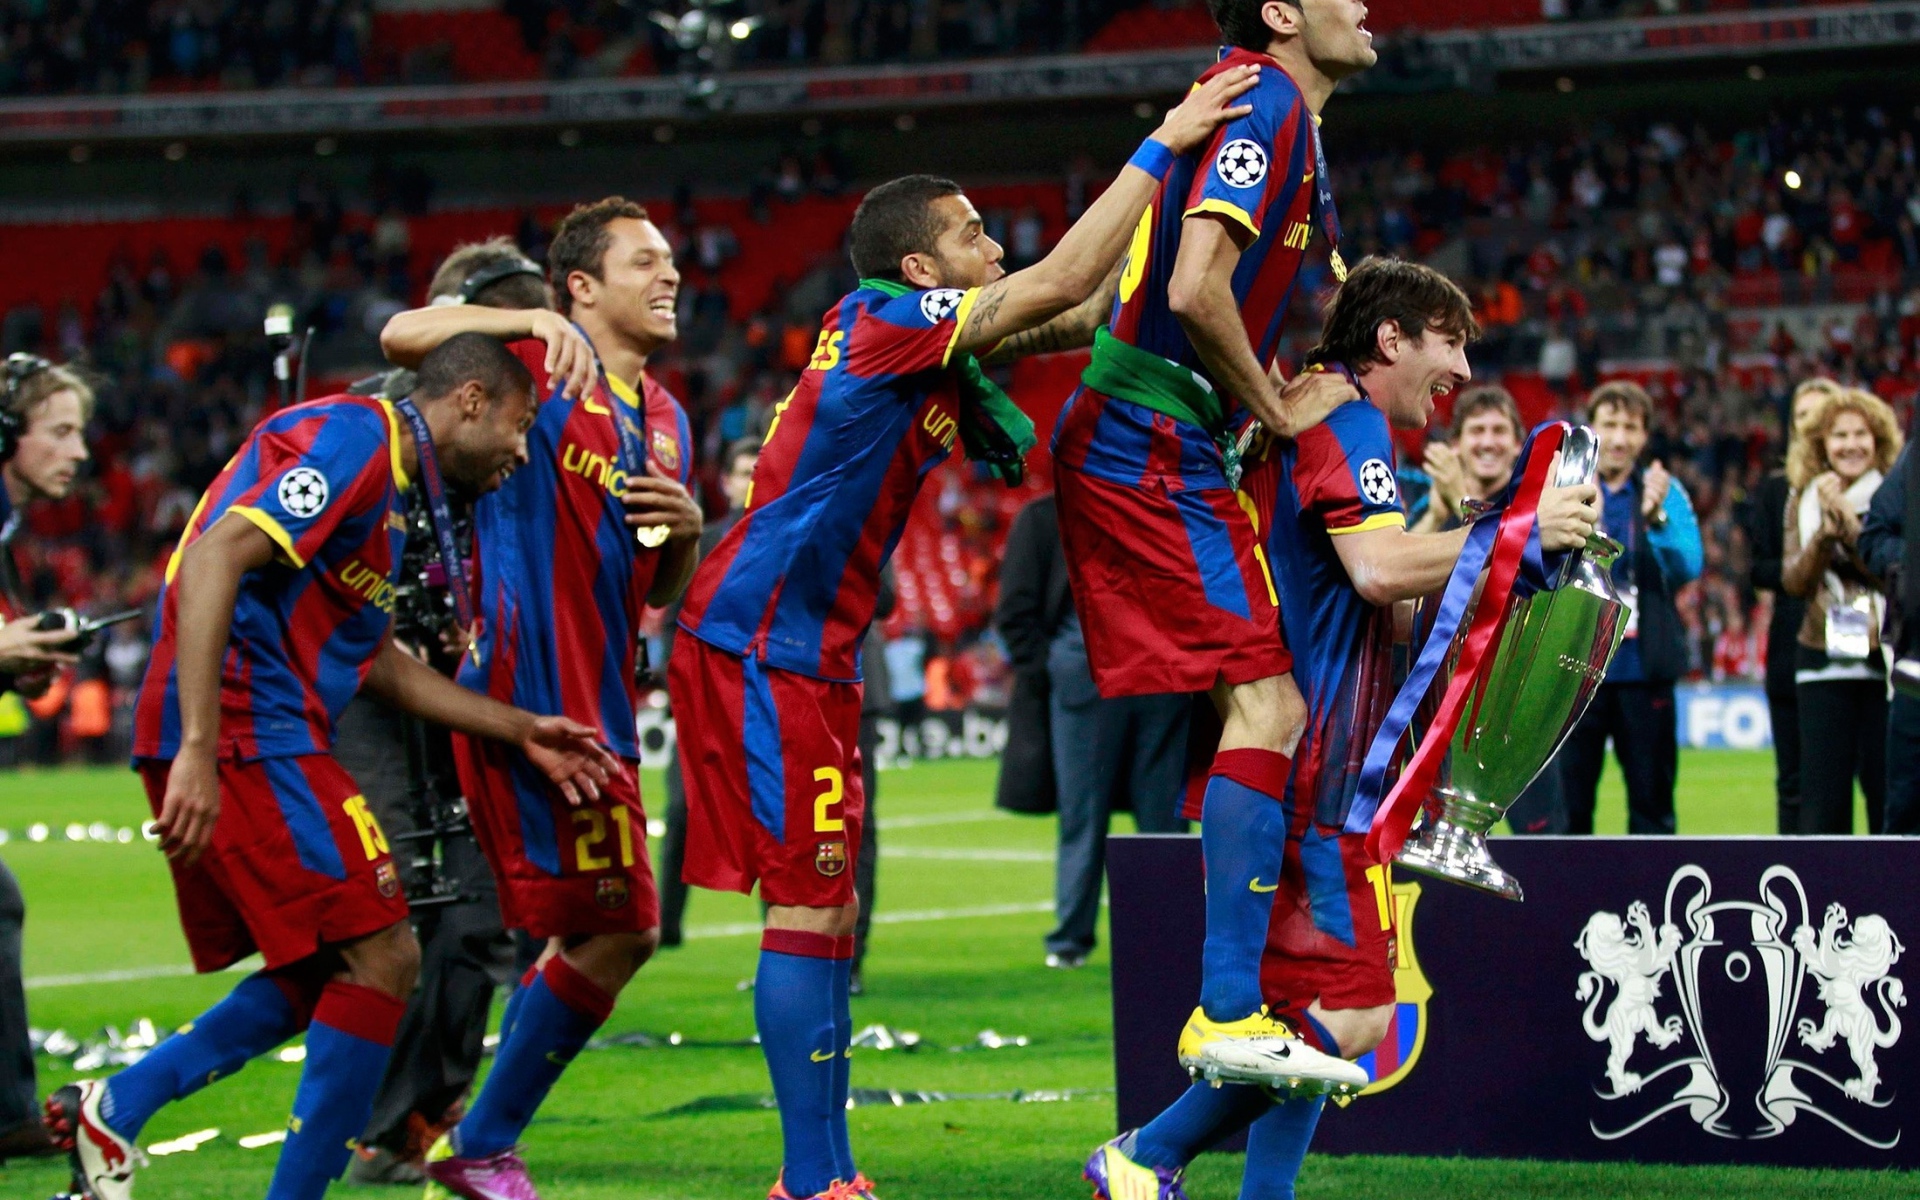 The halfback of Barcelona Sergio Busquets victorious again